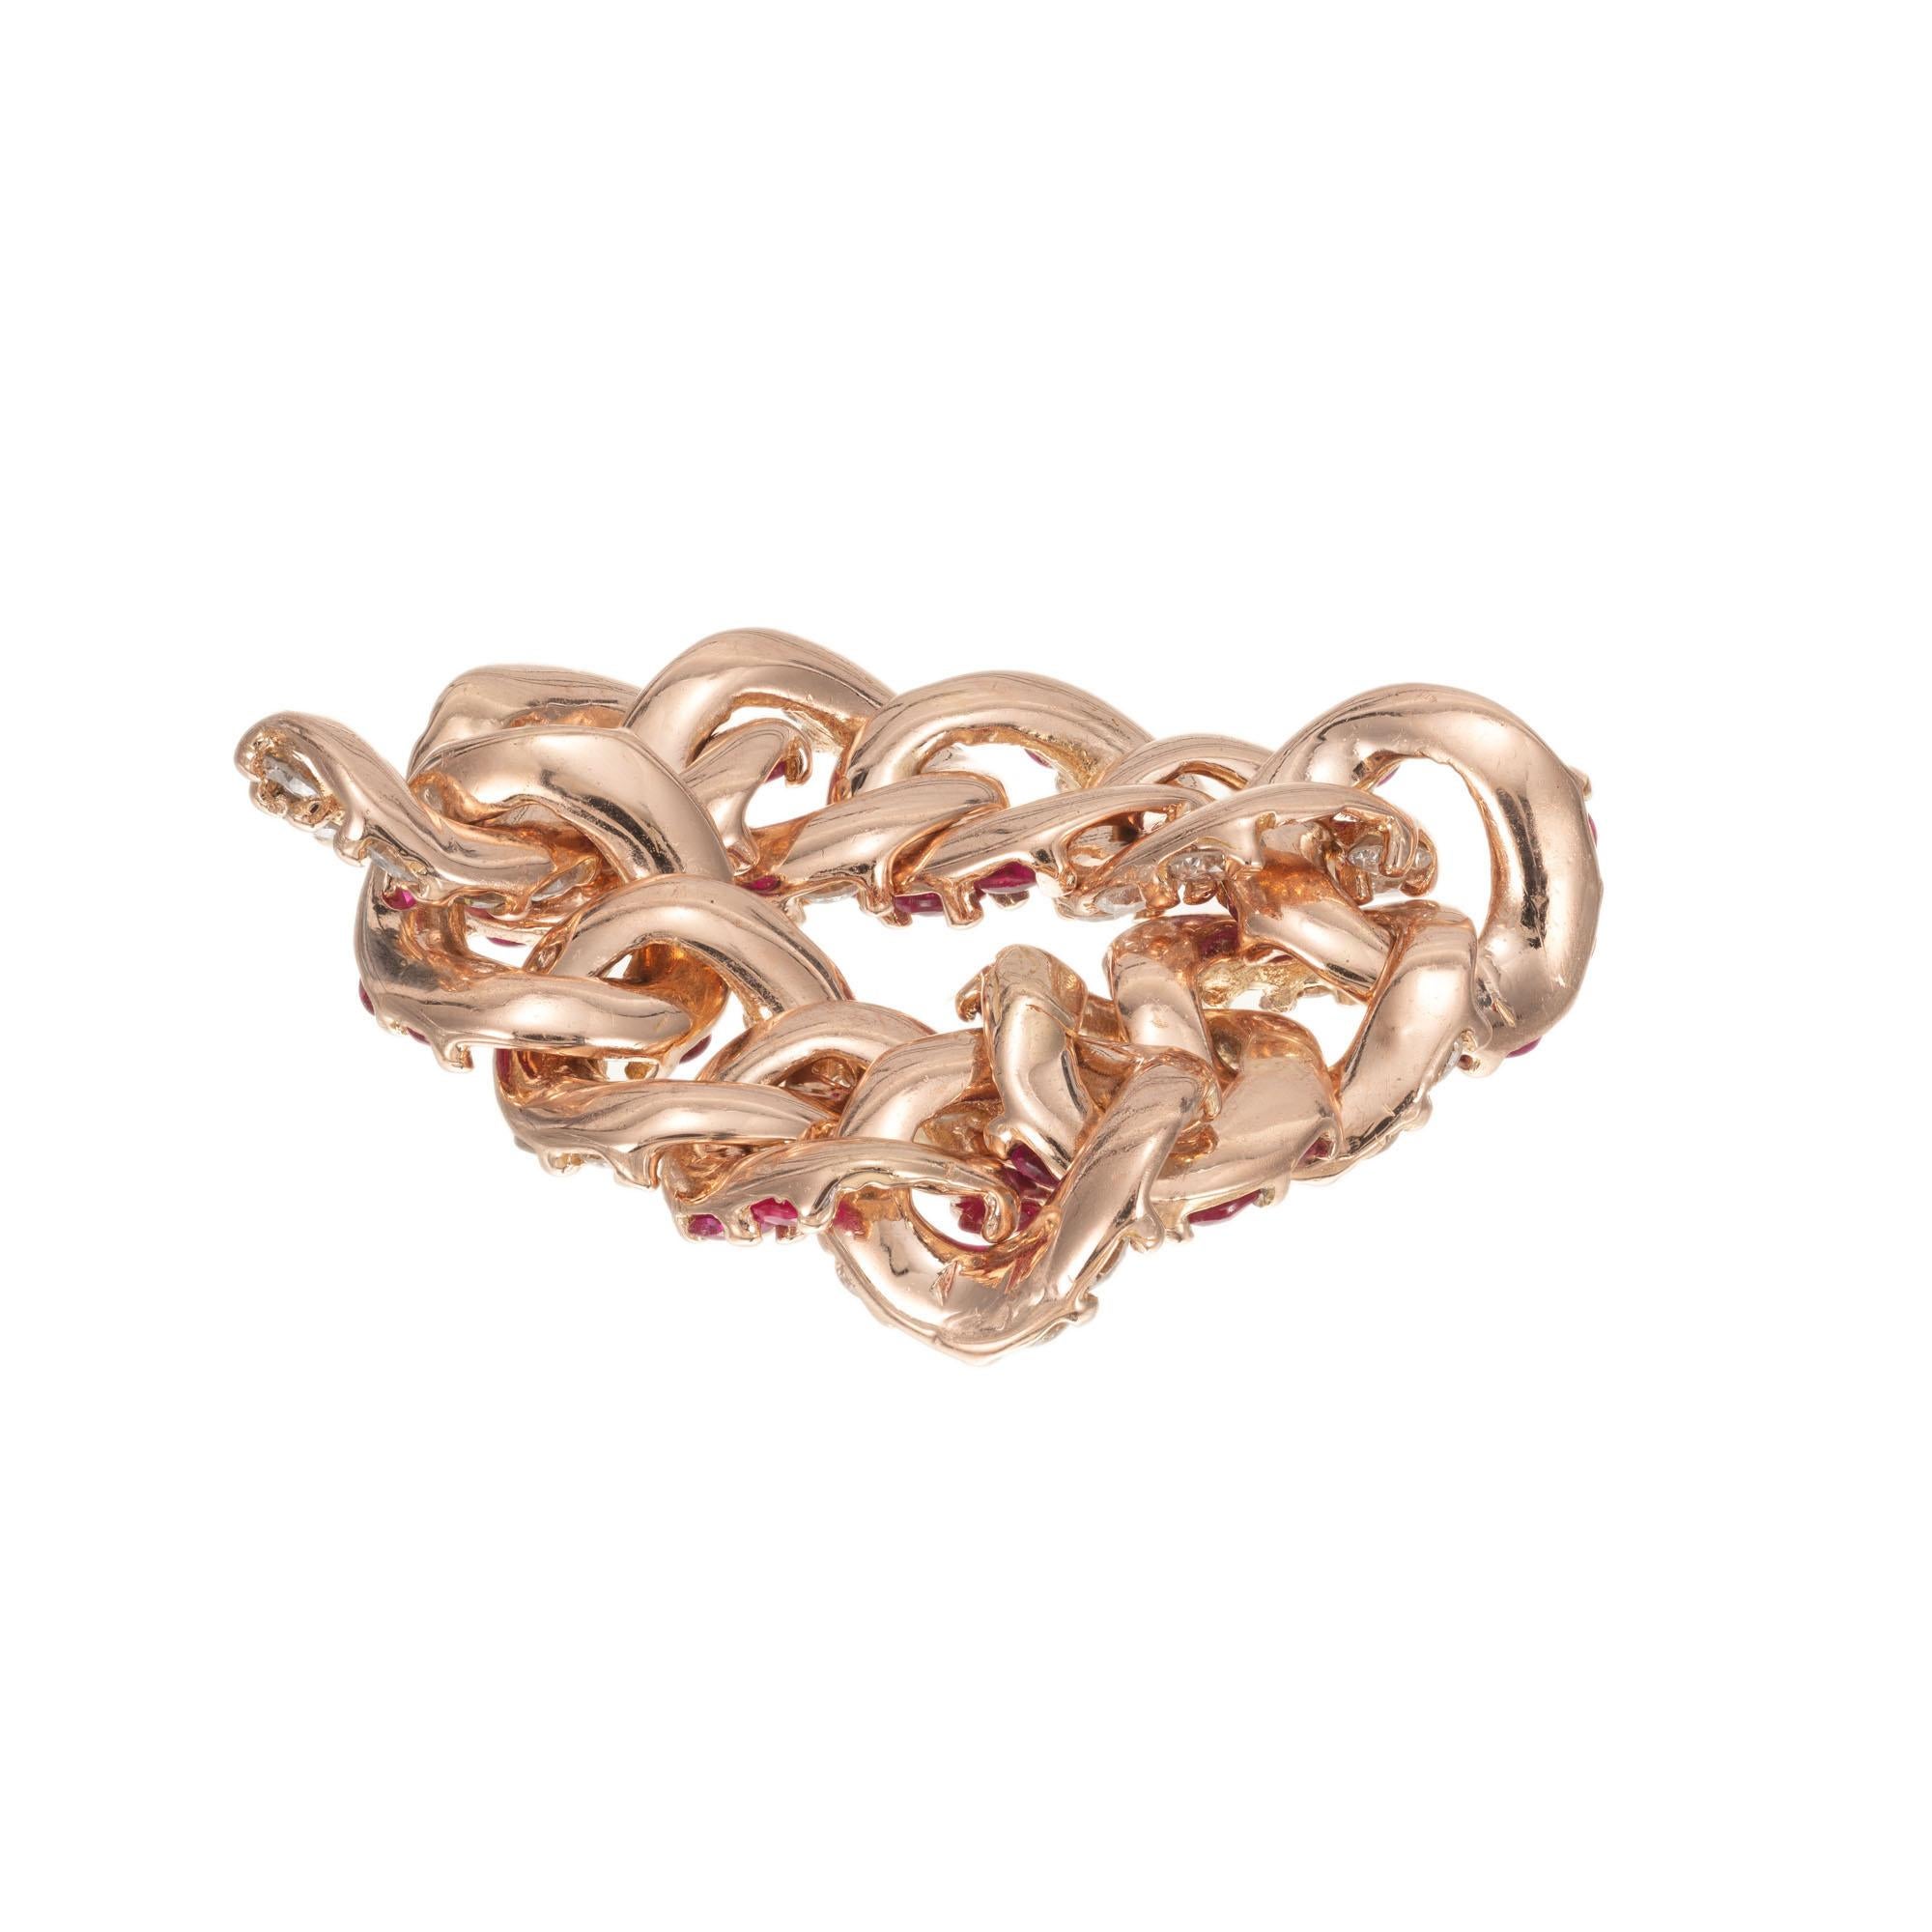 Vintage retro 1940's flexible link 18k rose gold ring with 24 round rubies and 24 round diamonds.  Handmade and not sizable.

24 round fine red rubies, VS-SI approx. .72cts
24 round brilliant cut diamonds, H VS approx. .60cts
Size 6.5 and not